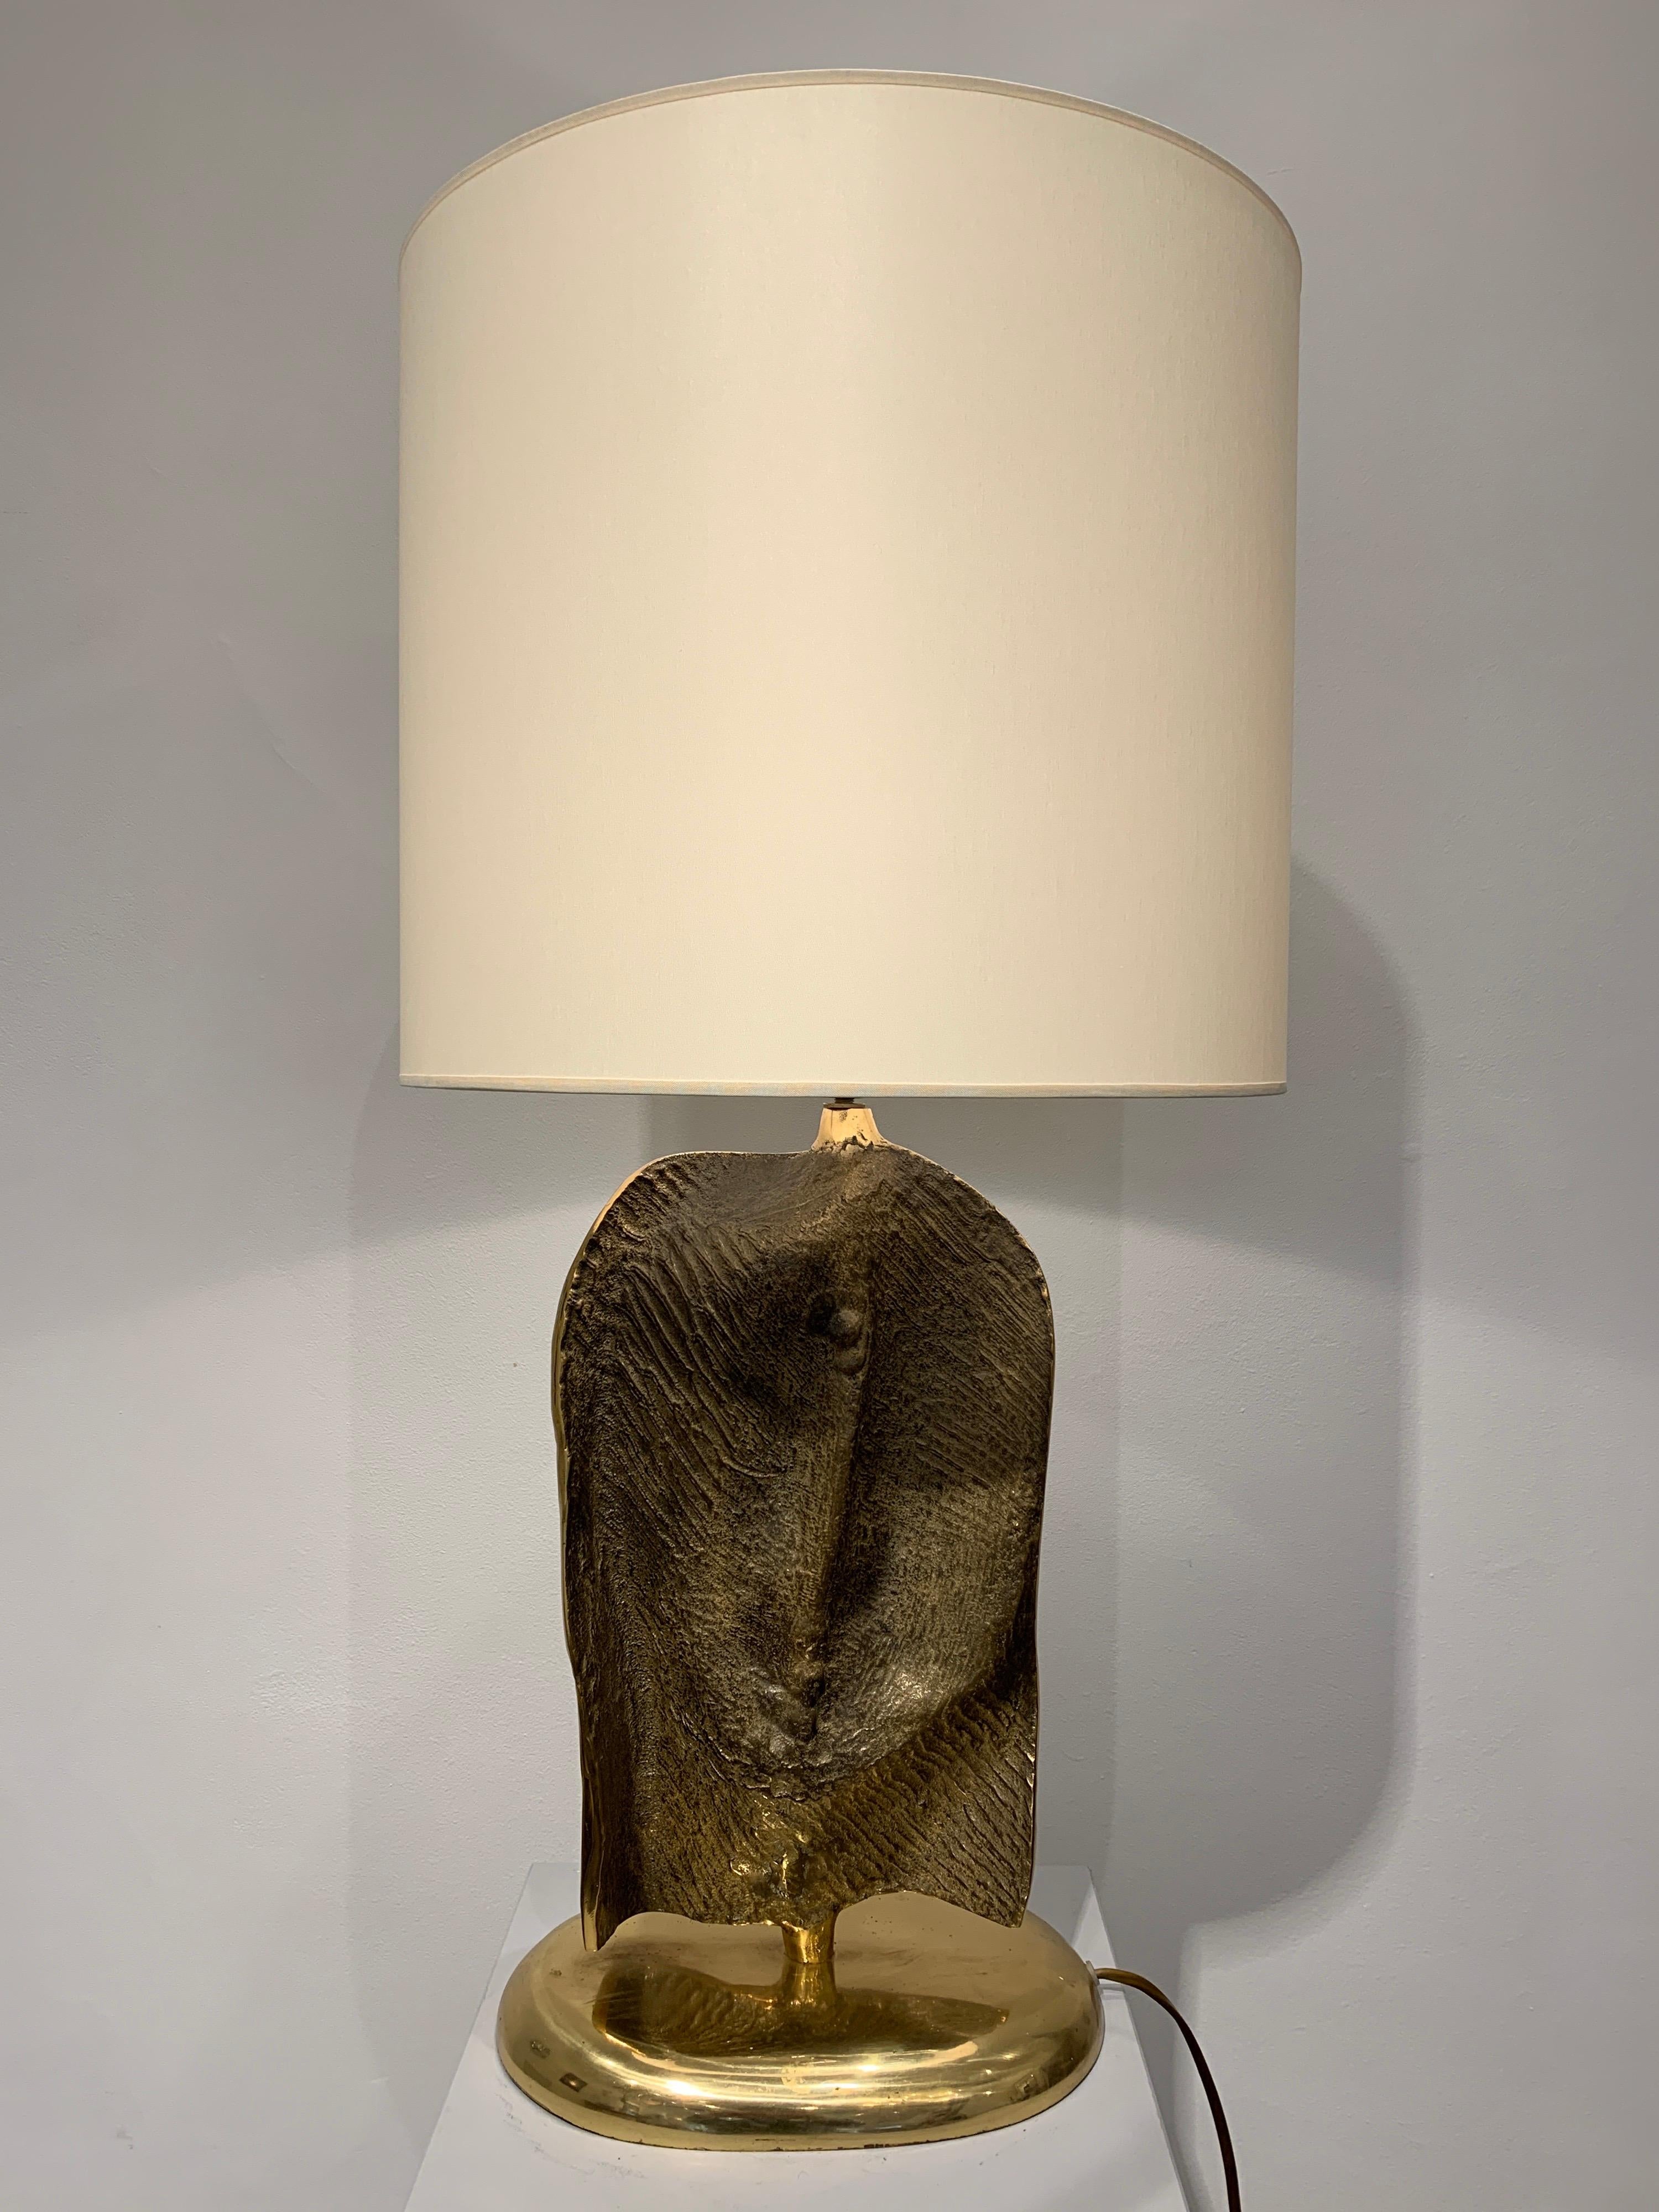 The lamp is a solid cast bronze worked in Brutalist manner. The quality is stunning. This type of elegant brutalist quality work is typical of the Belgian Brutalist style of 1970s, as can been seen in the works of the Jomckers, Mathias, Daro, to